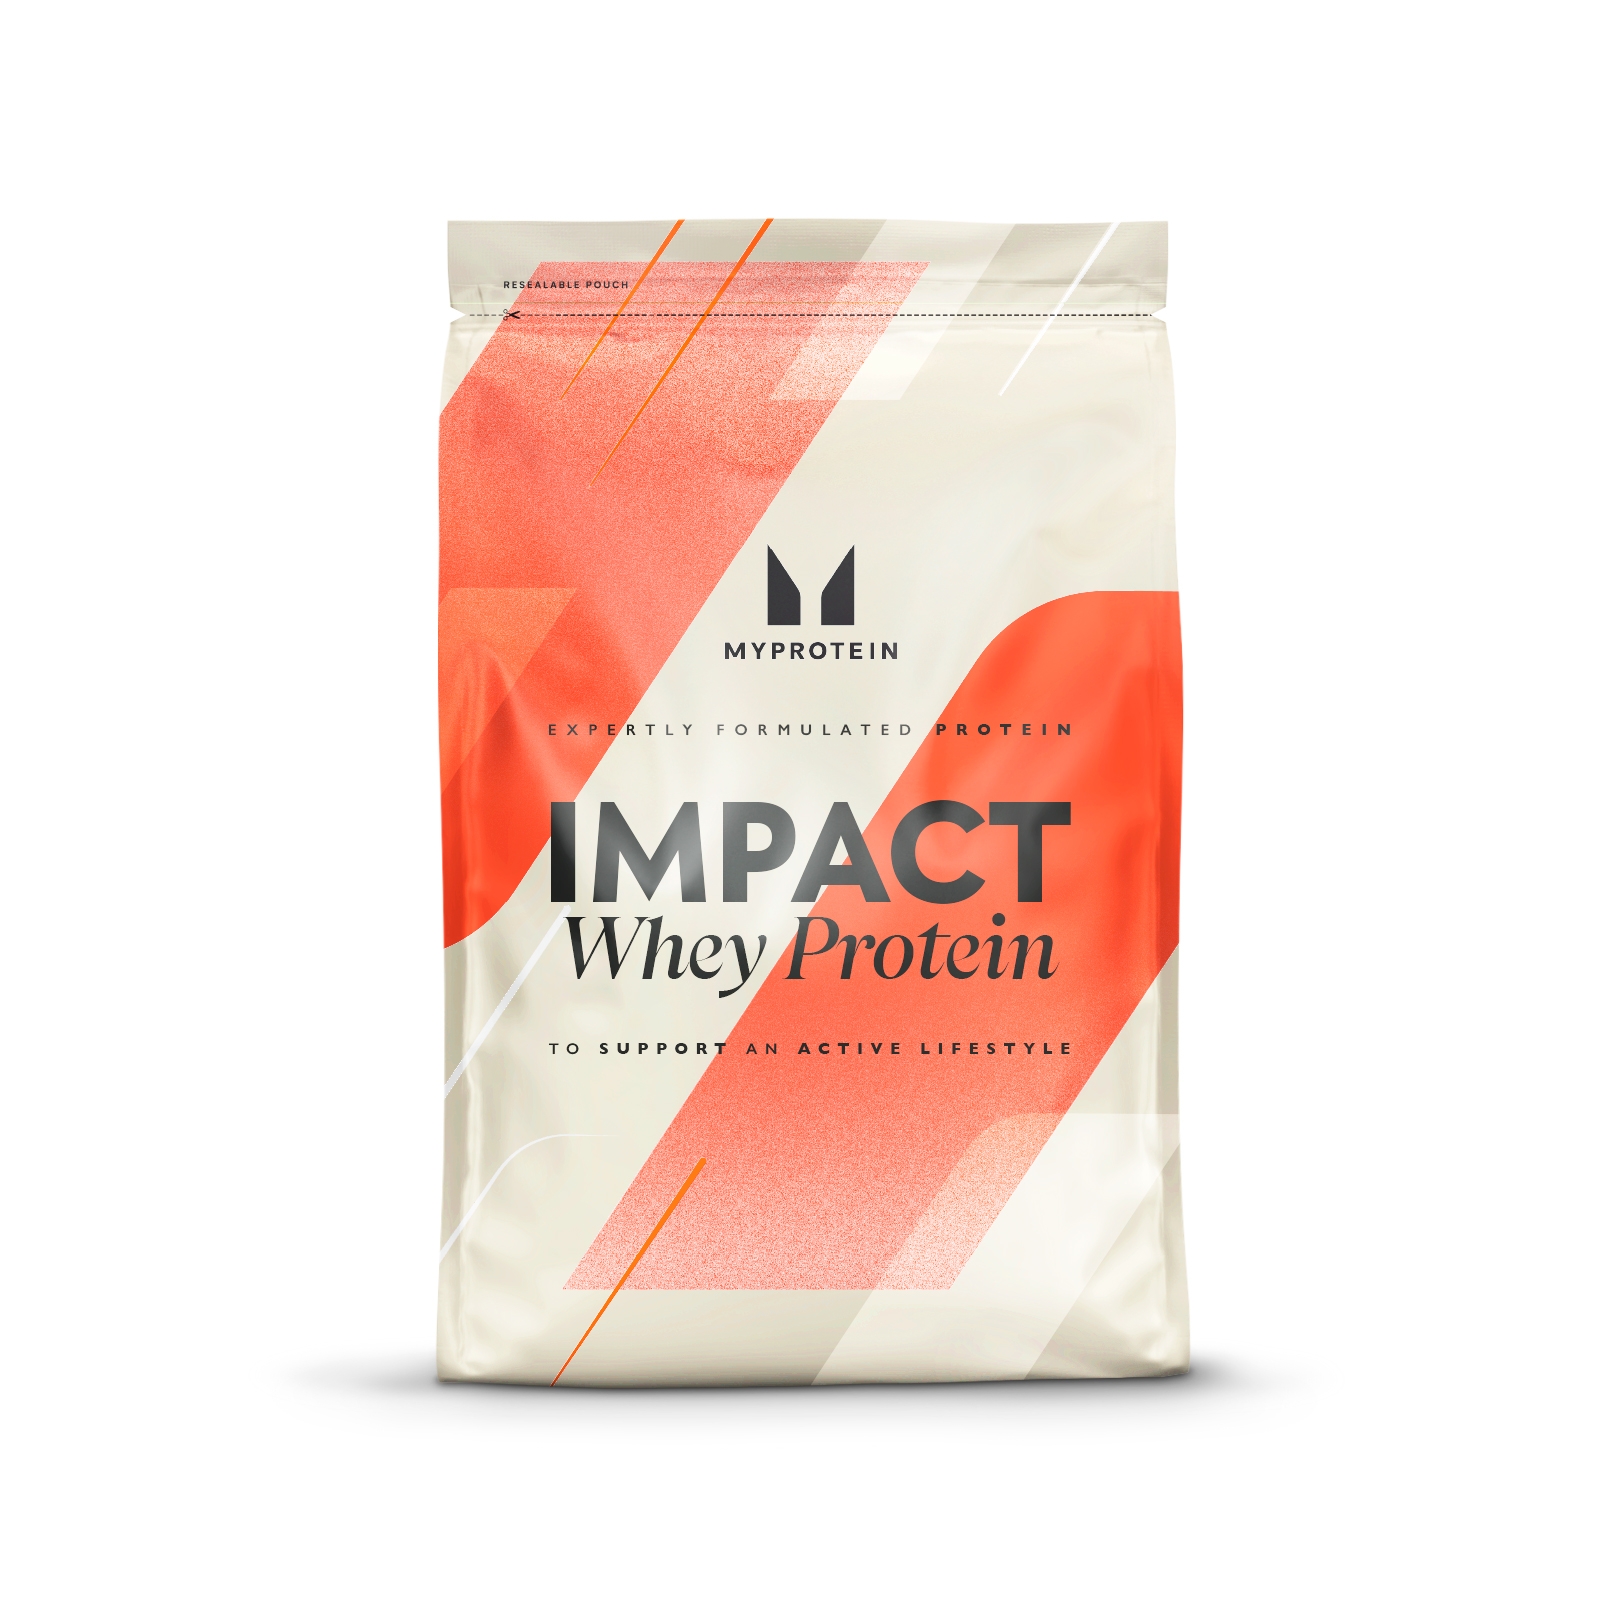 Image of Myprotein Impact Whey Protein - 25kg - Chocolate e Caramelo 10786586 PT21